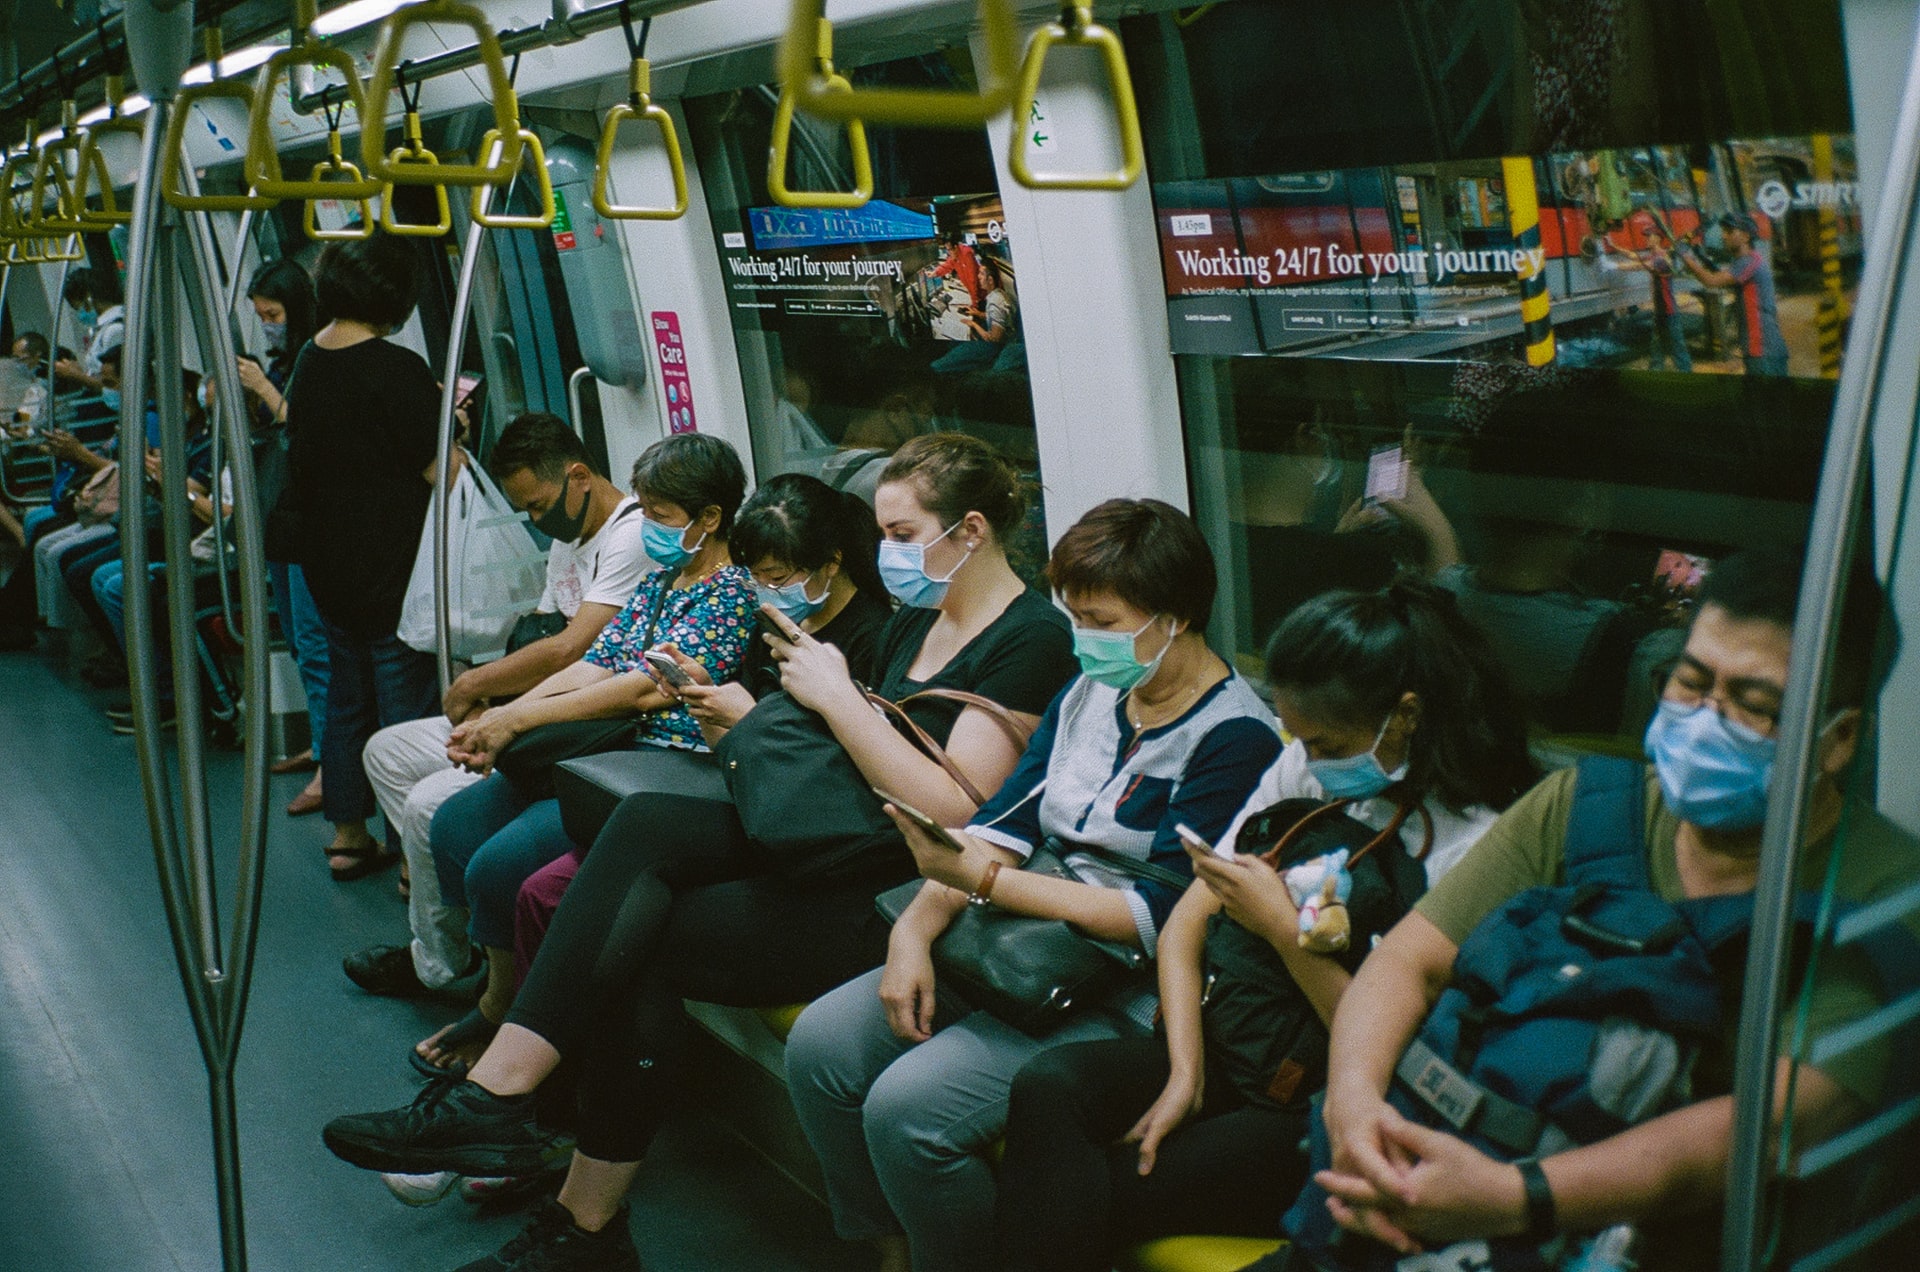 People sitting on a train wearing masks